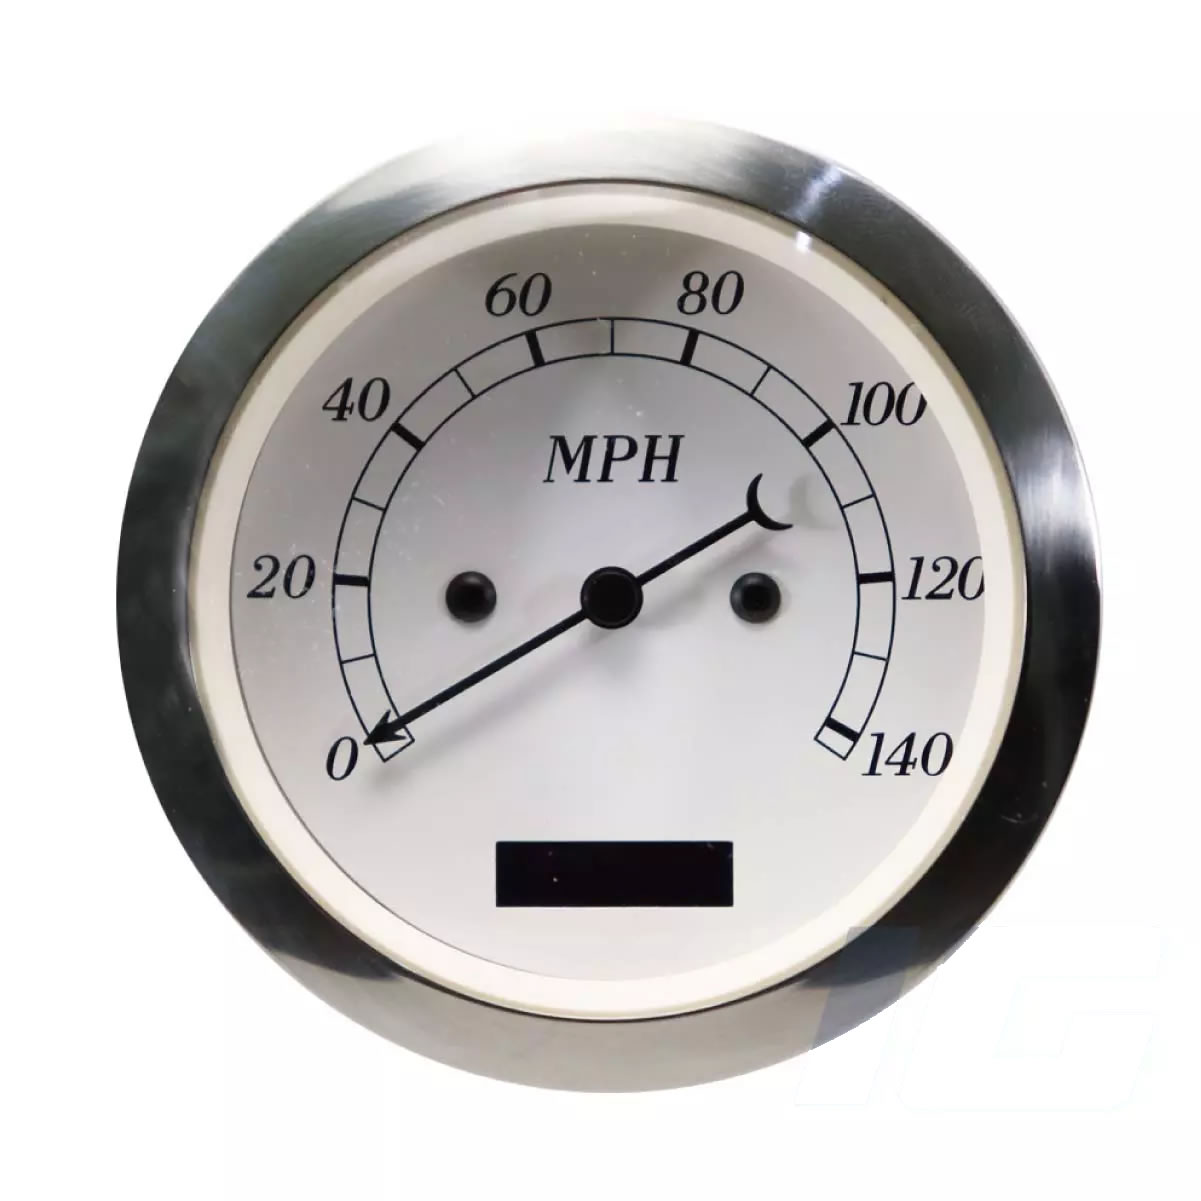 White Face Black Neddle - Electrical Speedometer For Vintage Car